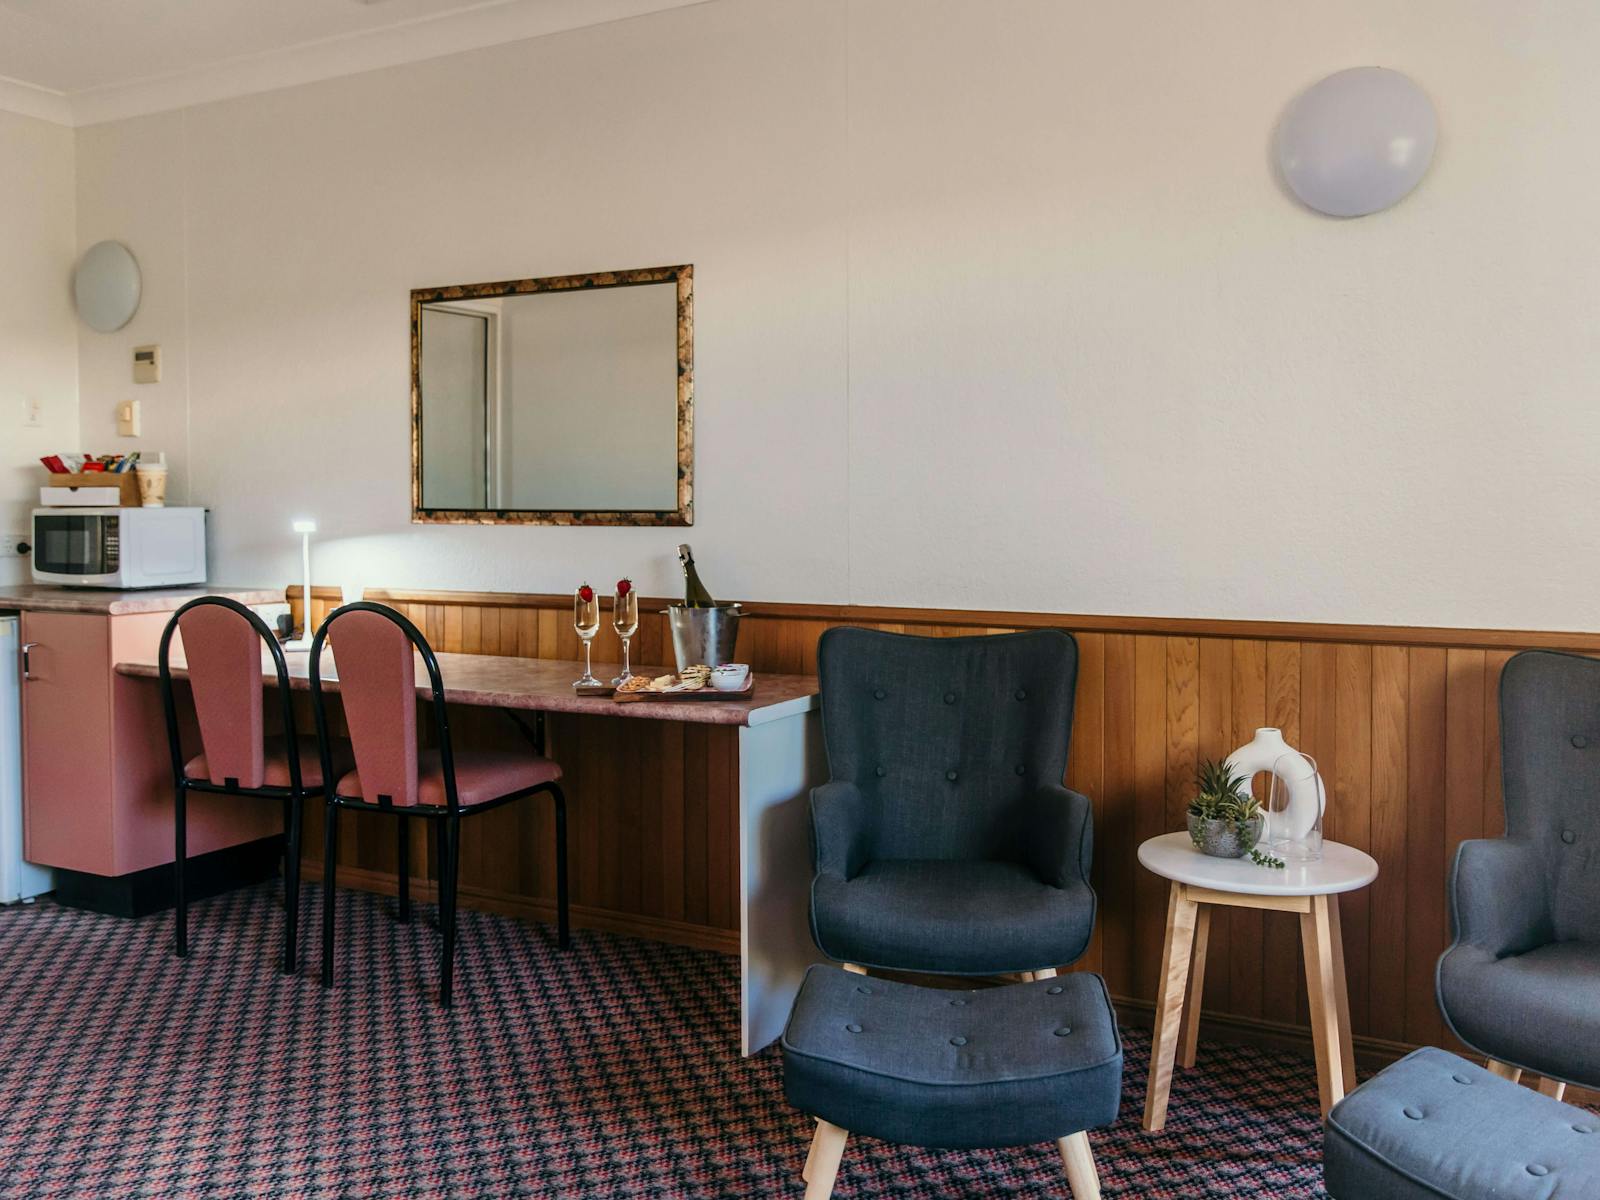 King Spa Room - A sitting area next to a desk with 2 chairs and a mounted wall mirror.